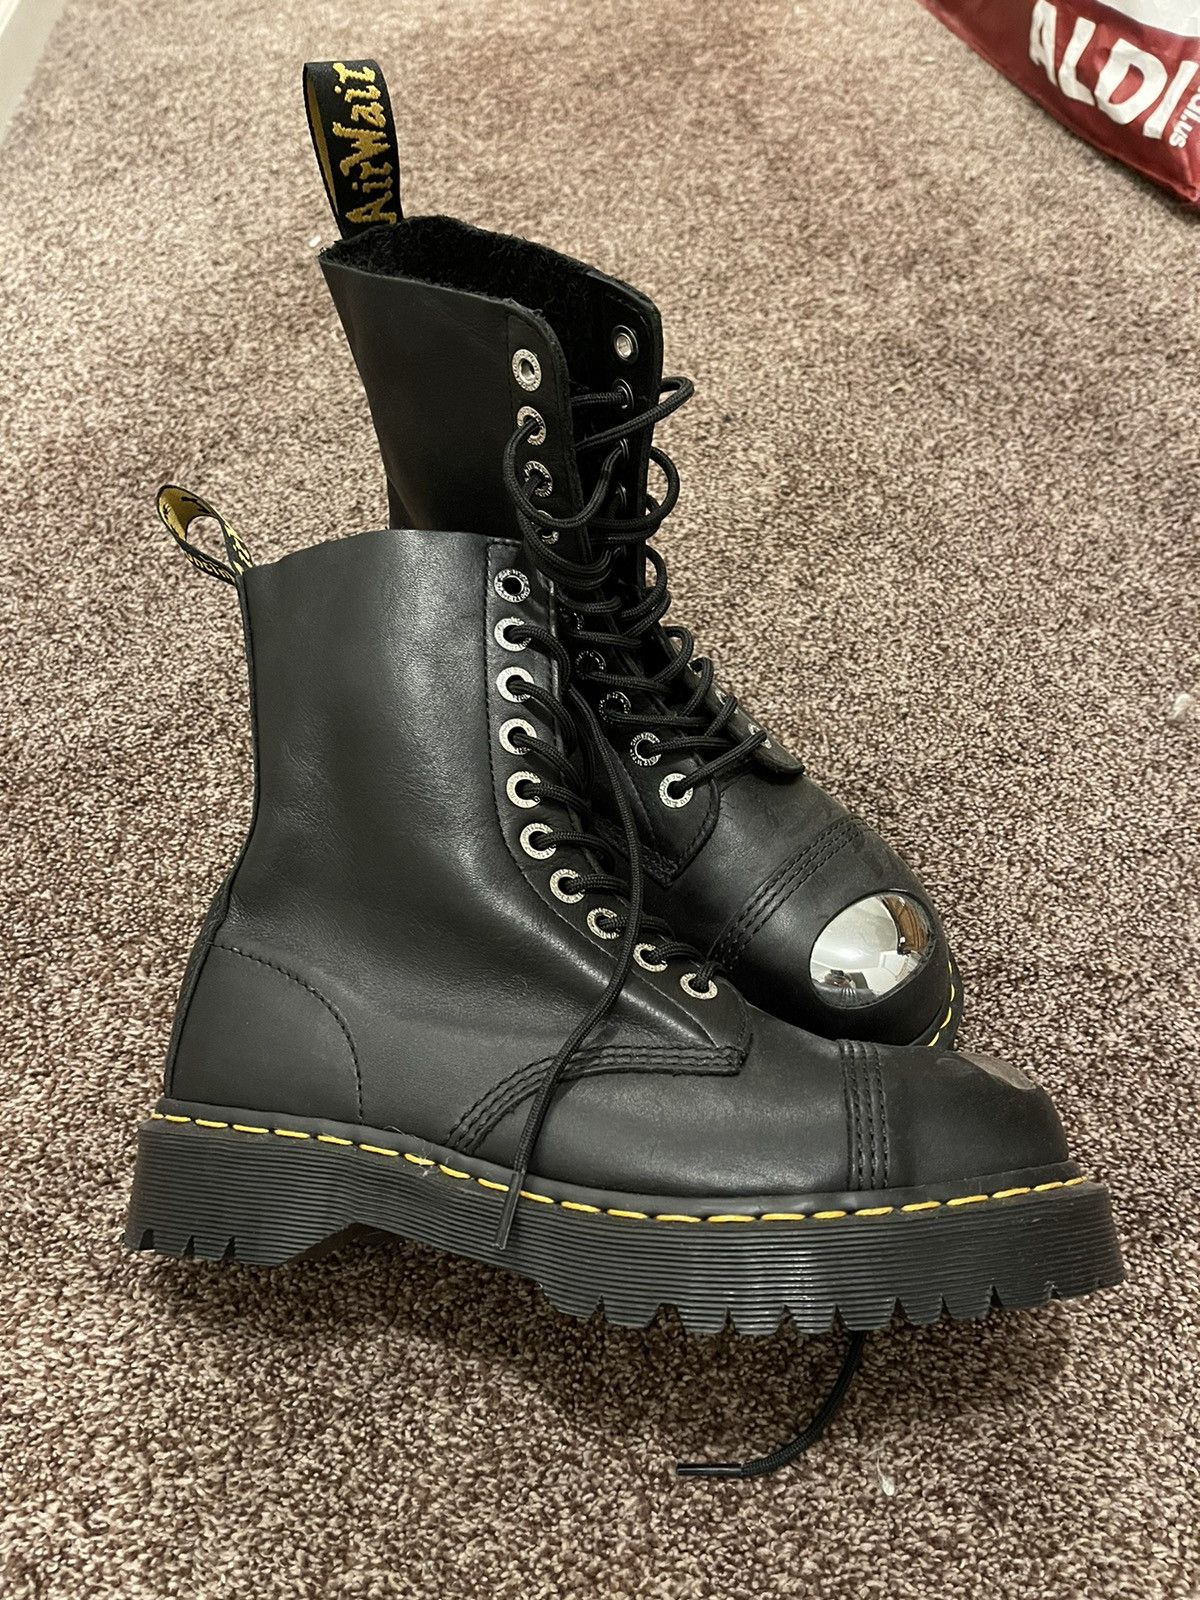 Dr. Martens Doc Martens 8761 BX exposed steel toe boot Size US 9 / EU 42 - 2 Preview